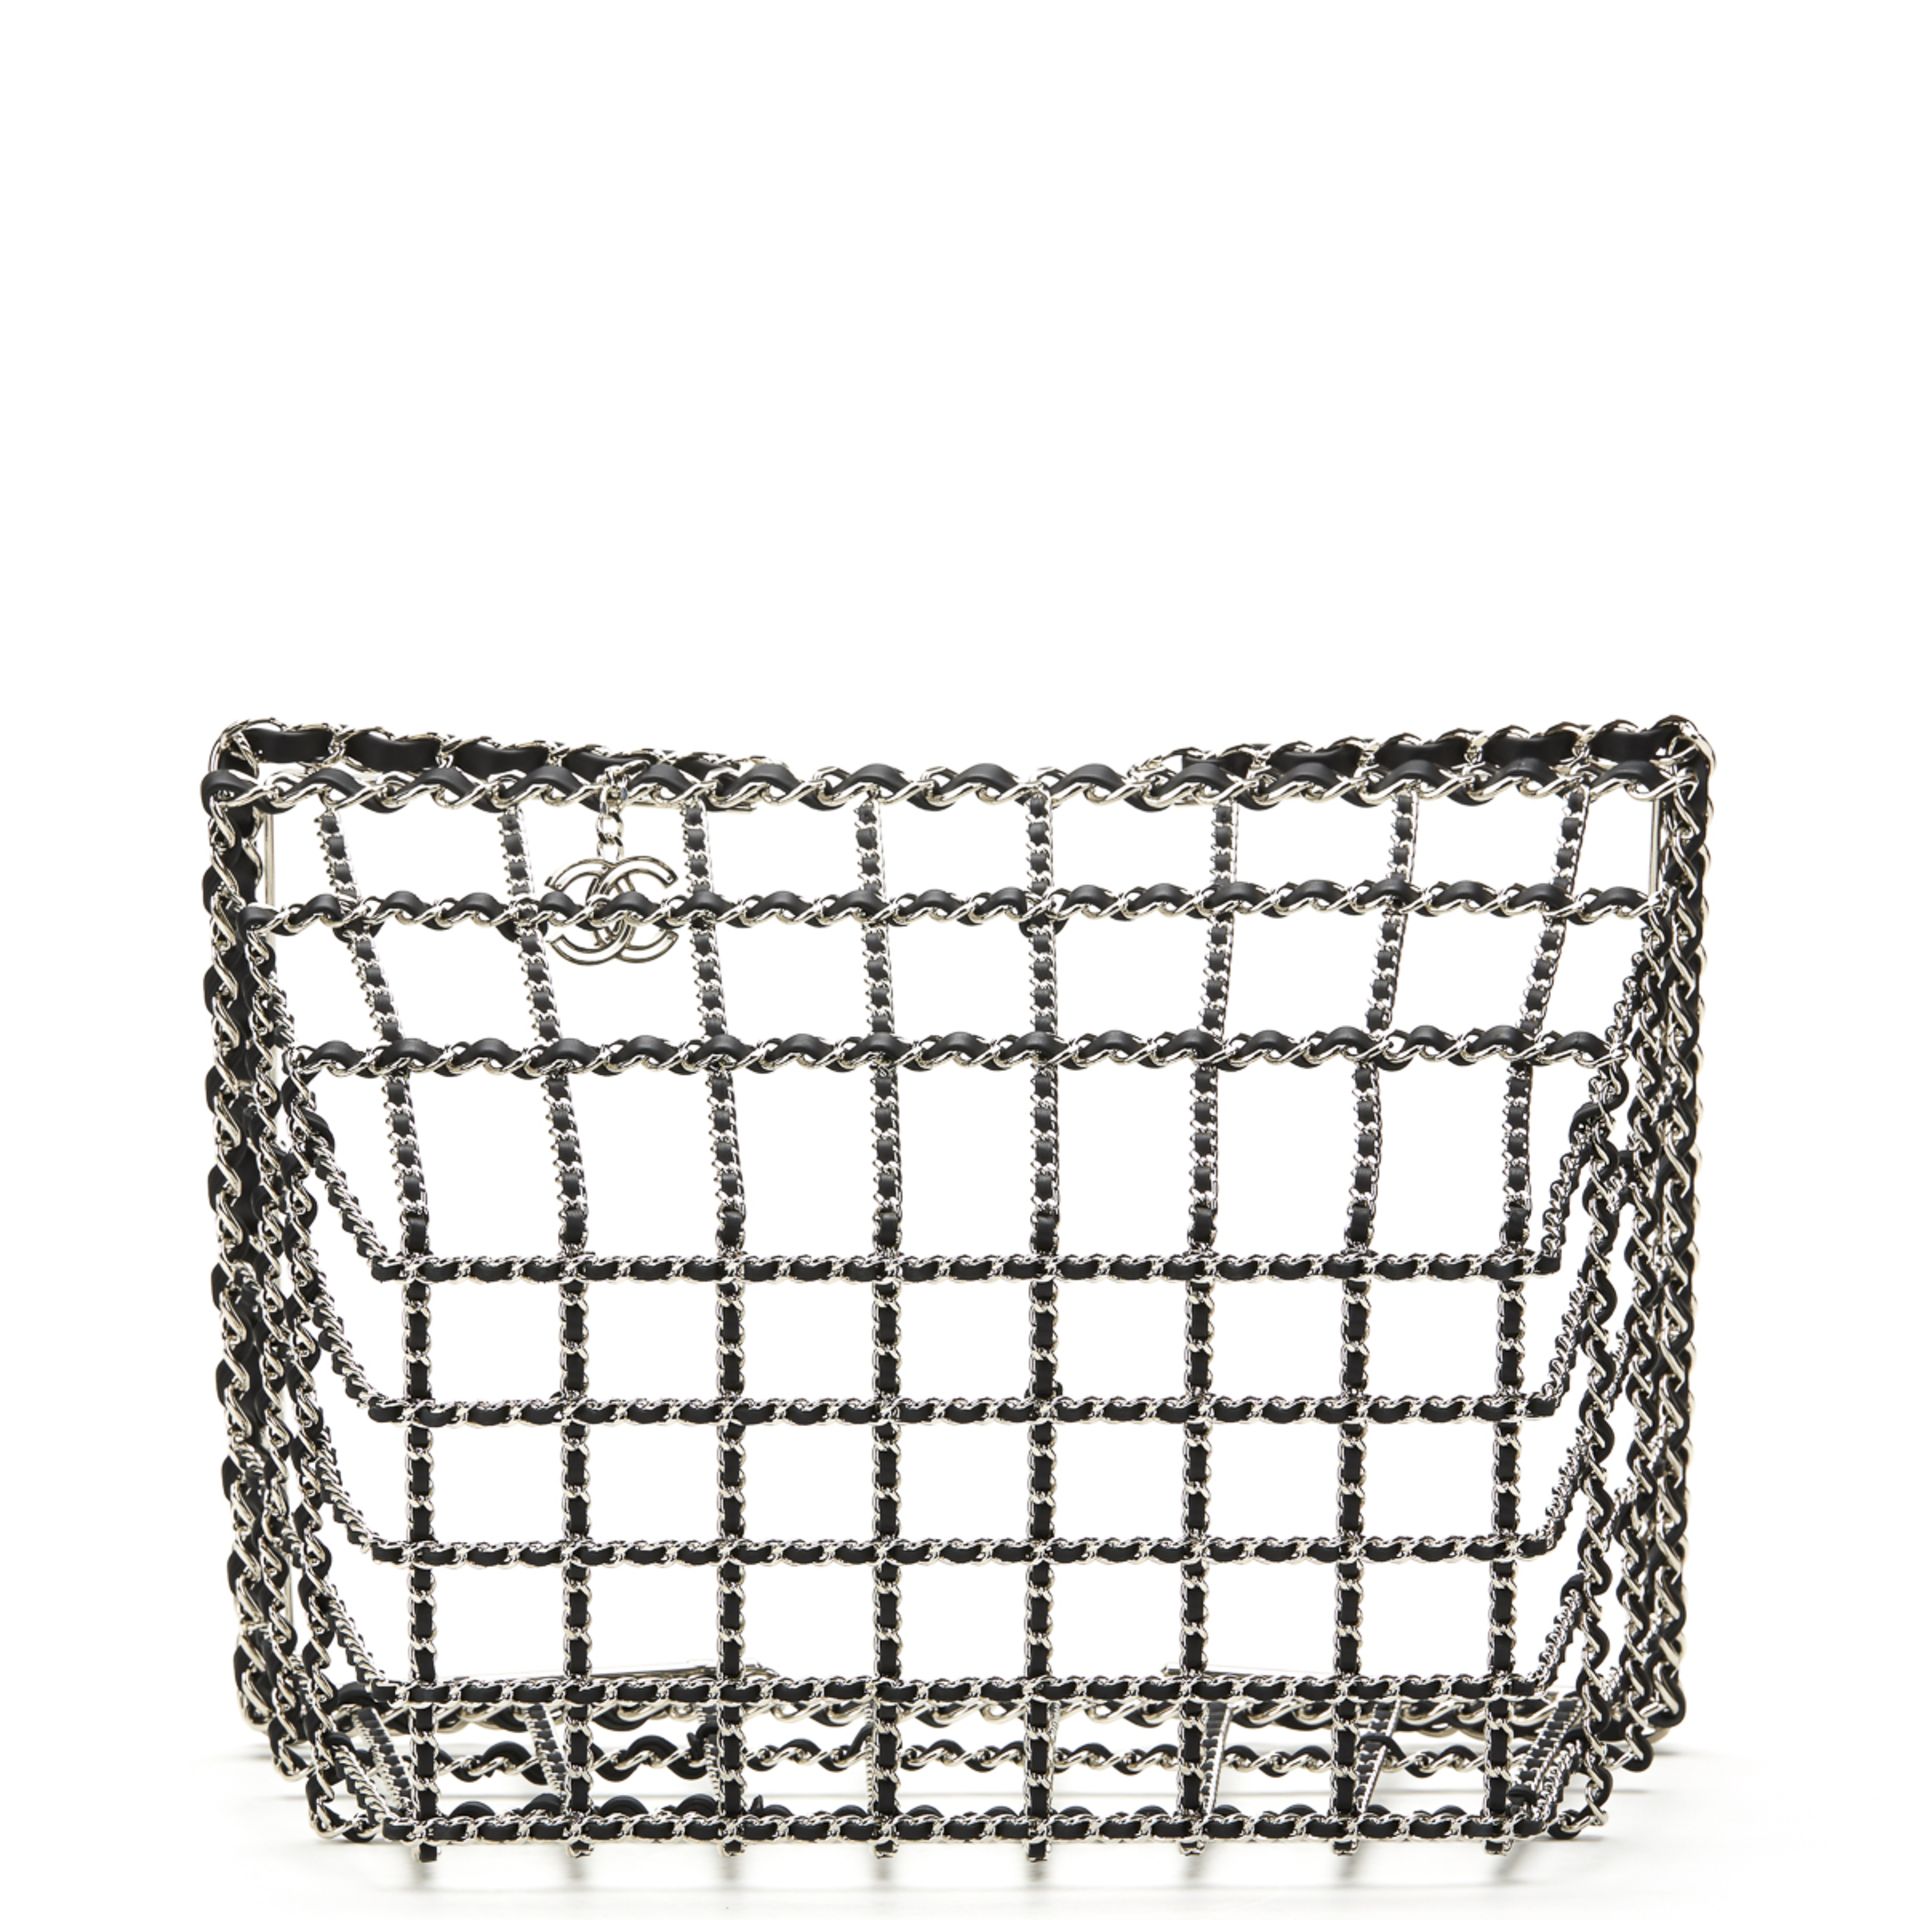 Silver & Black Calfskin Leather Fall 2014 Act 2 Basket Bag - Image 6 of 9